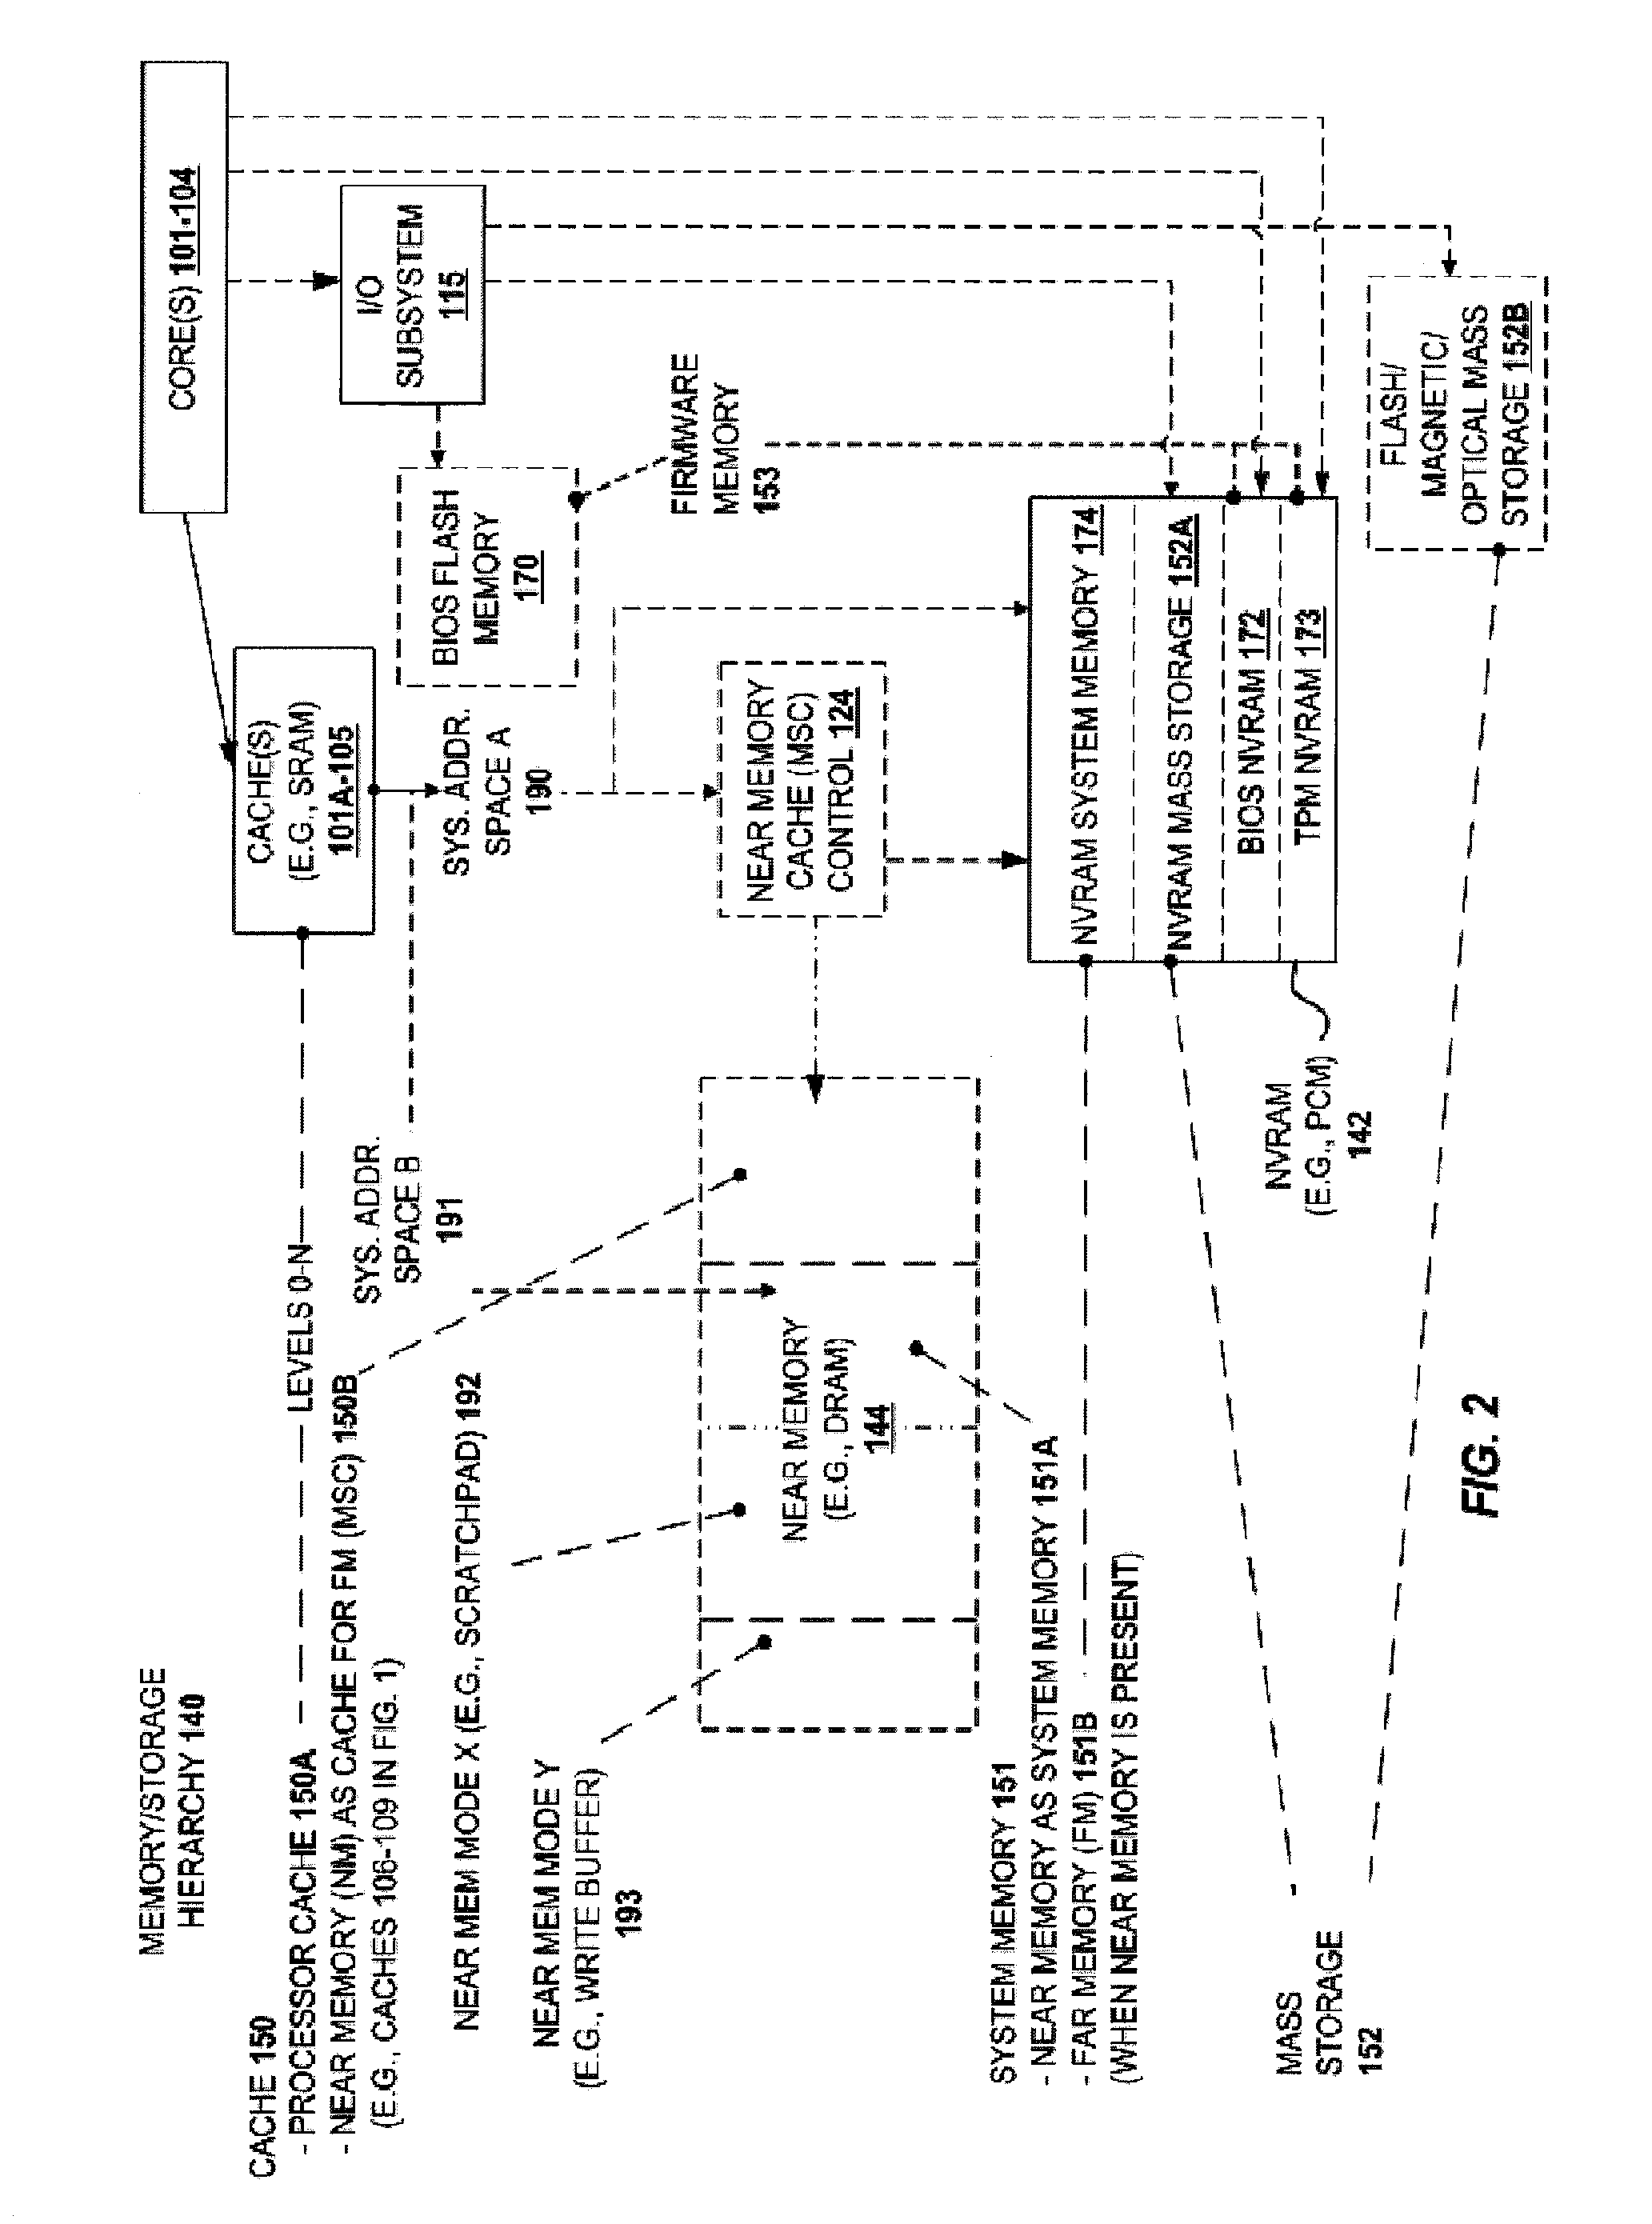 Dynamic partial power down of  memory-side cache in a 2-level  memory hierarchy